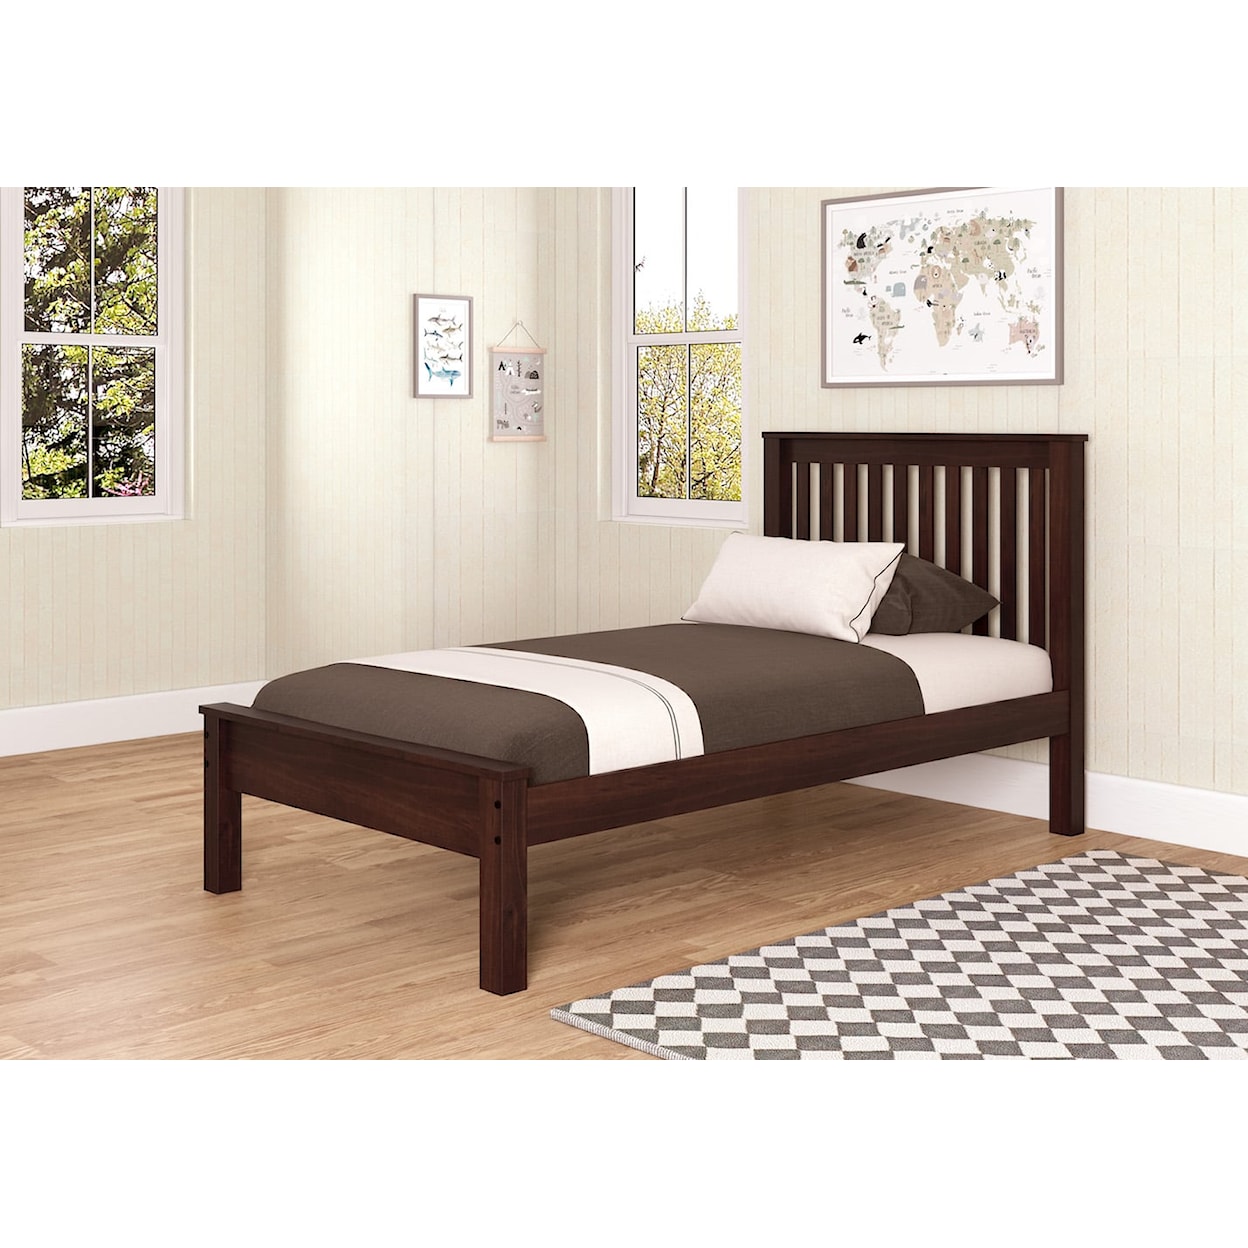 Donco Trading Co Platform Beds JAKE TWIN CAPPUCCINO PLATFORM BED |